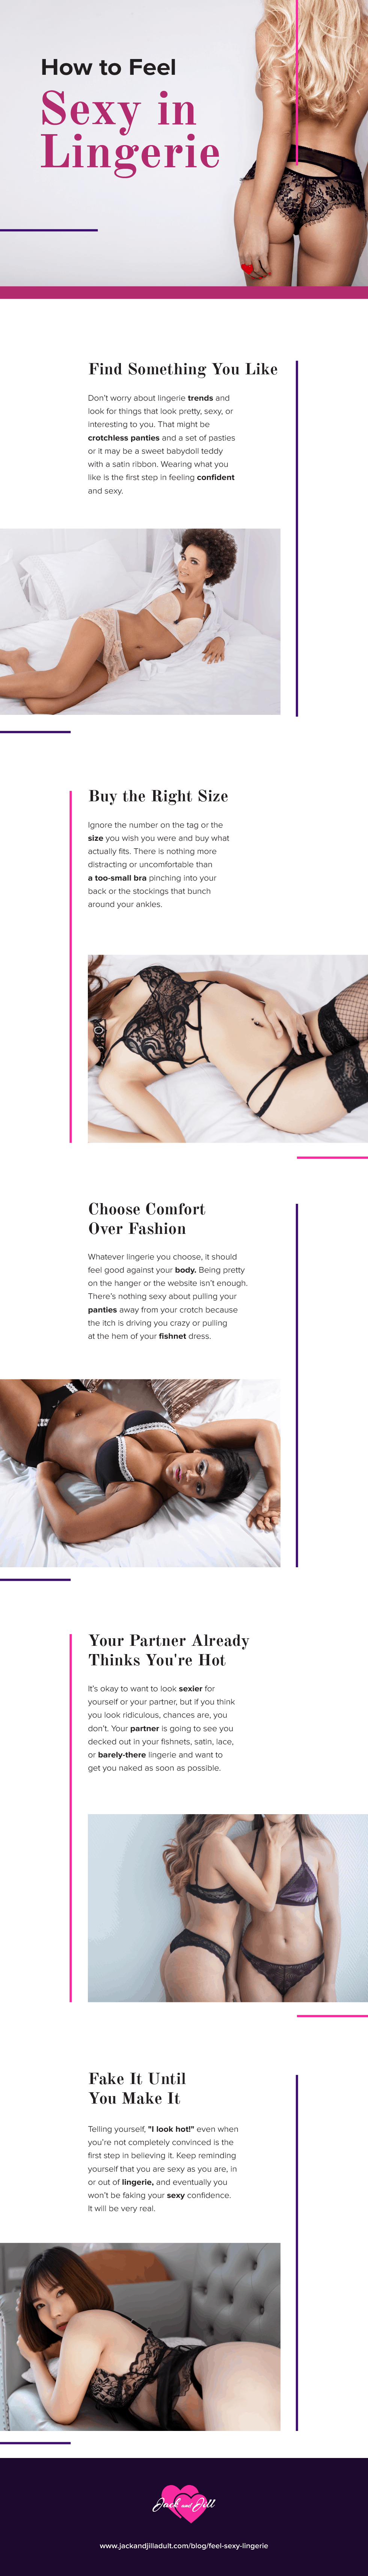 Infographic for How to Feel Sexy in Lingerie